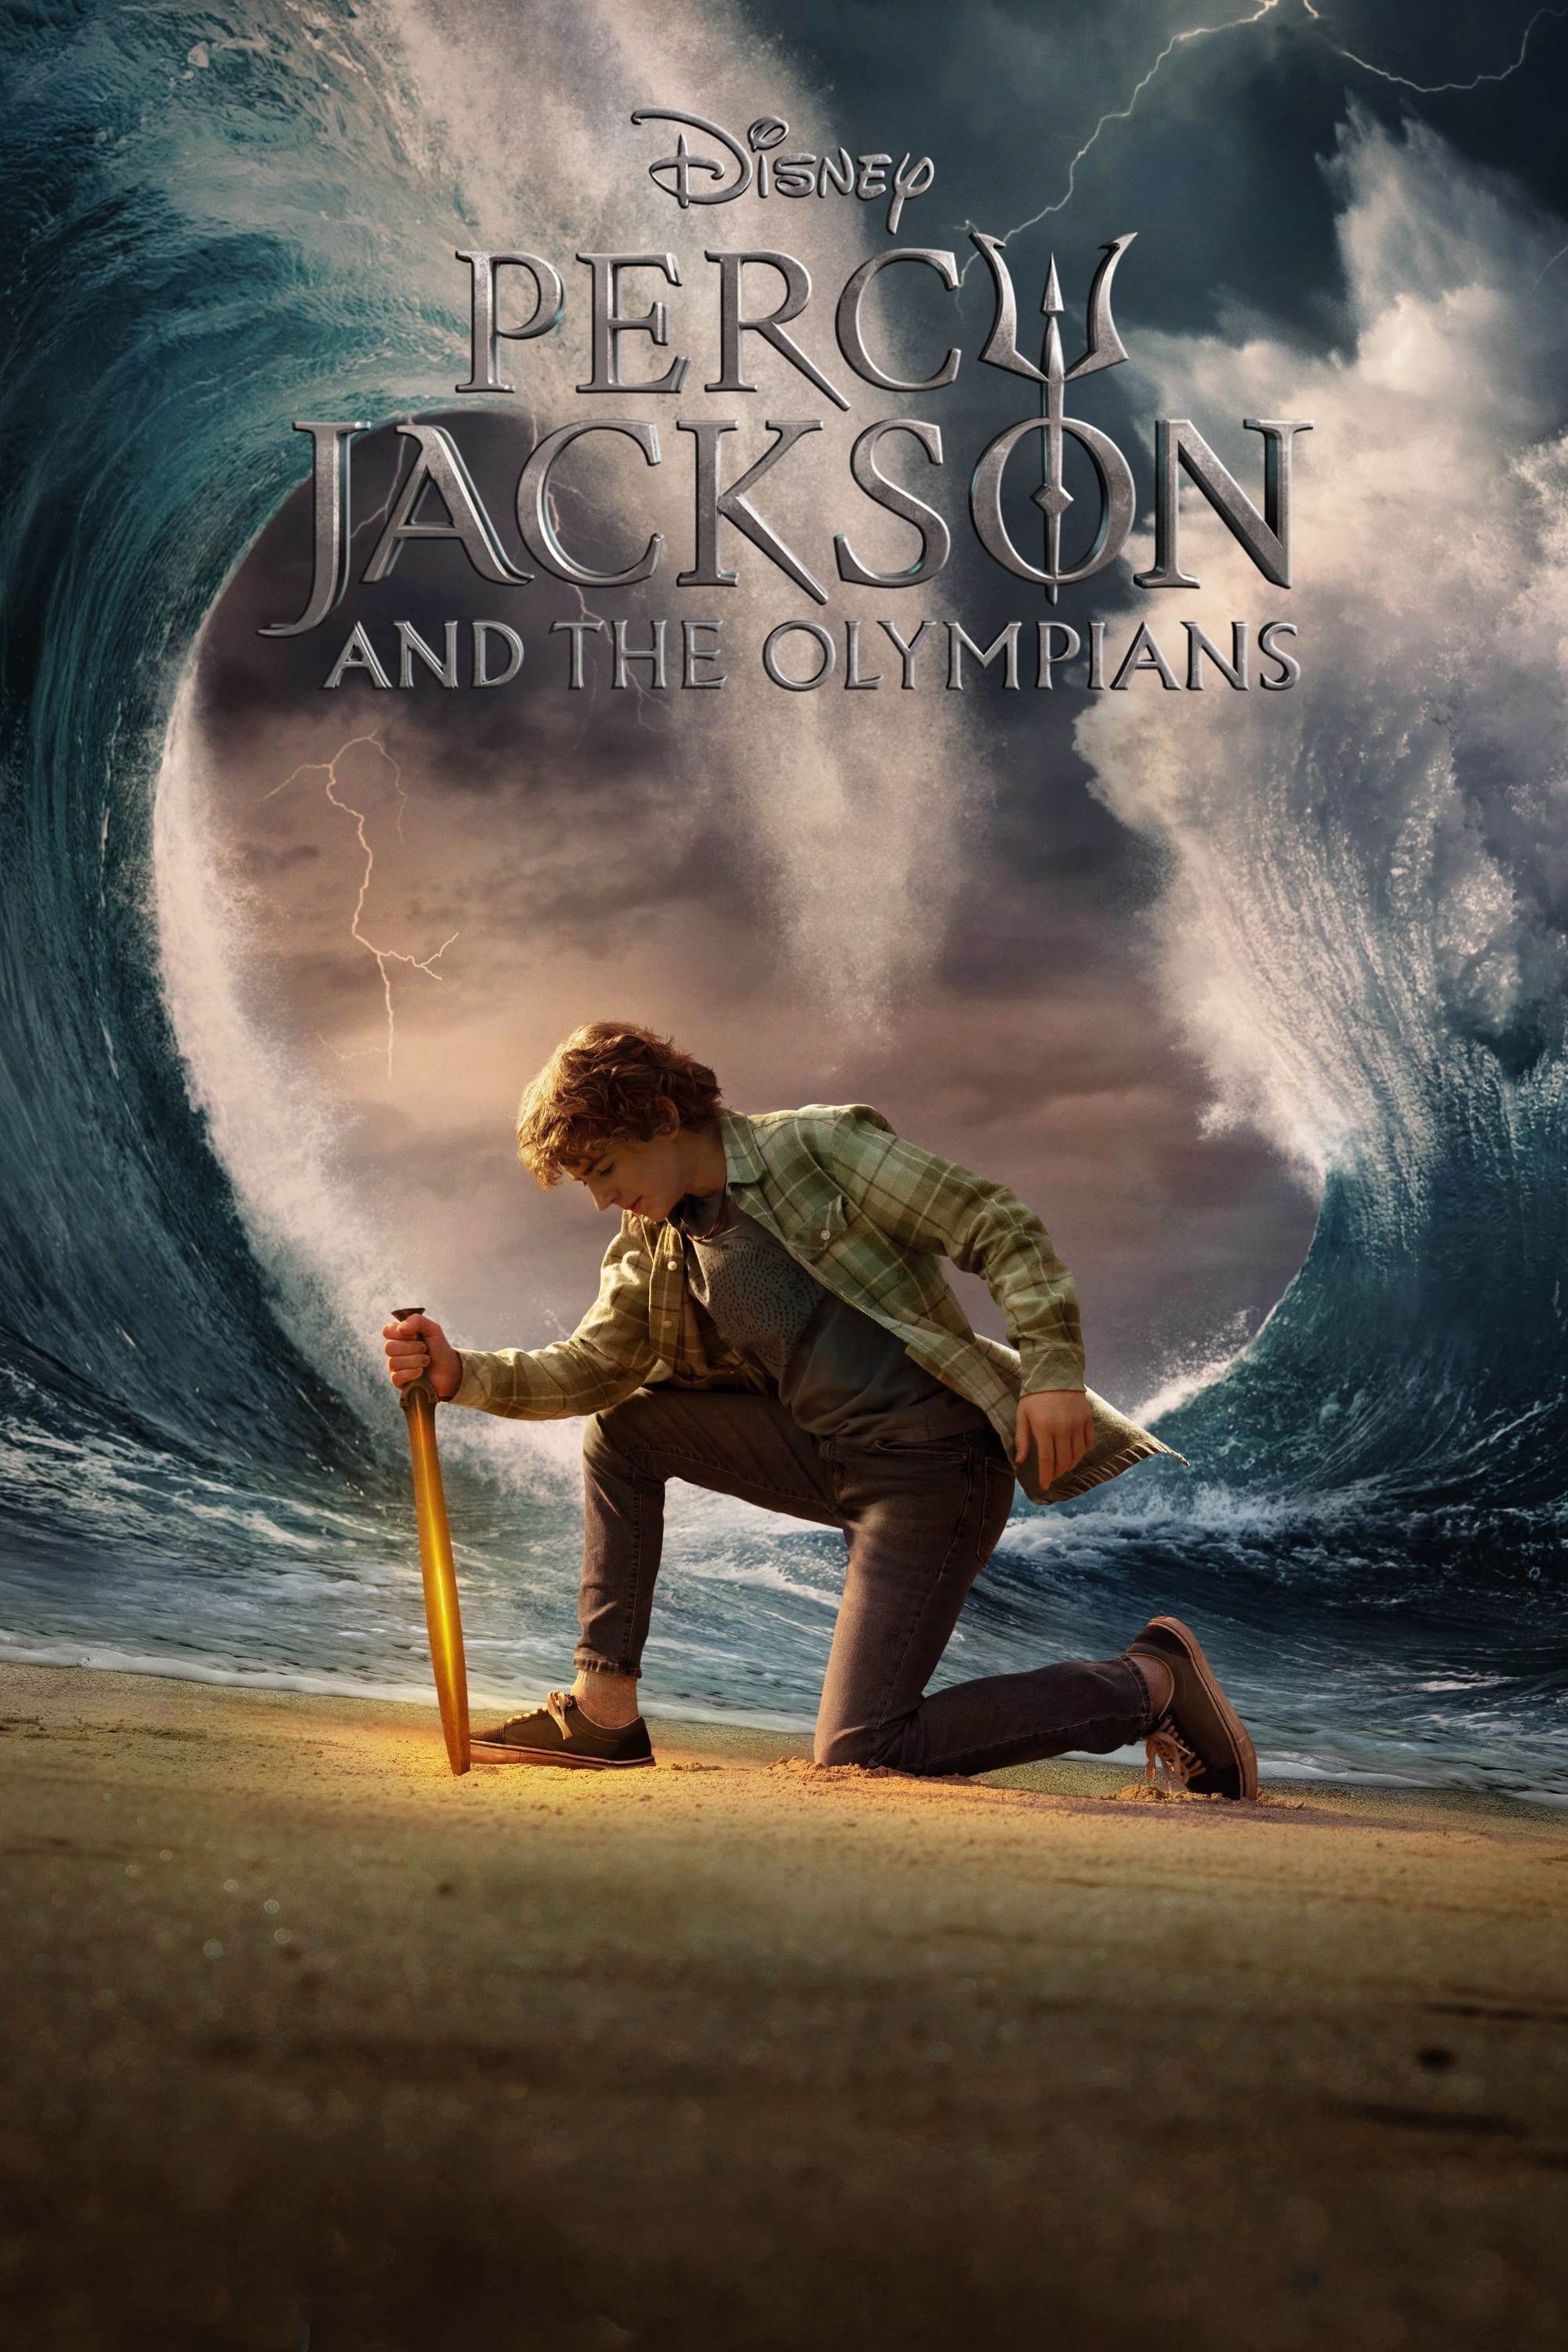 Percy Jackson and the Olympians TV Shows About Based On Novel Or Book